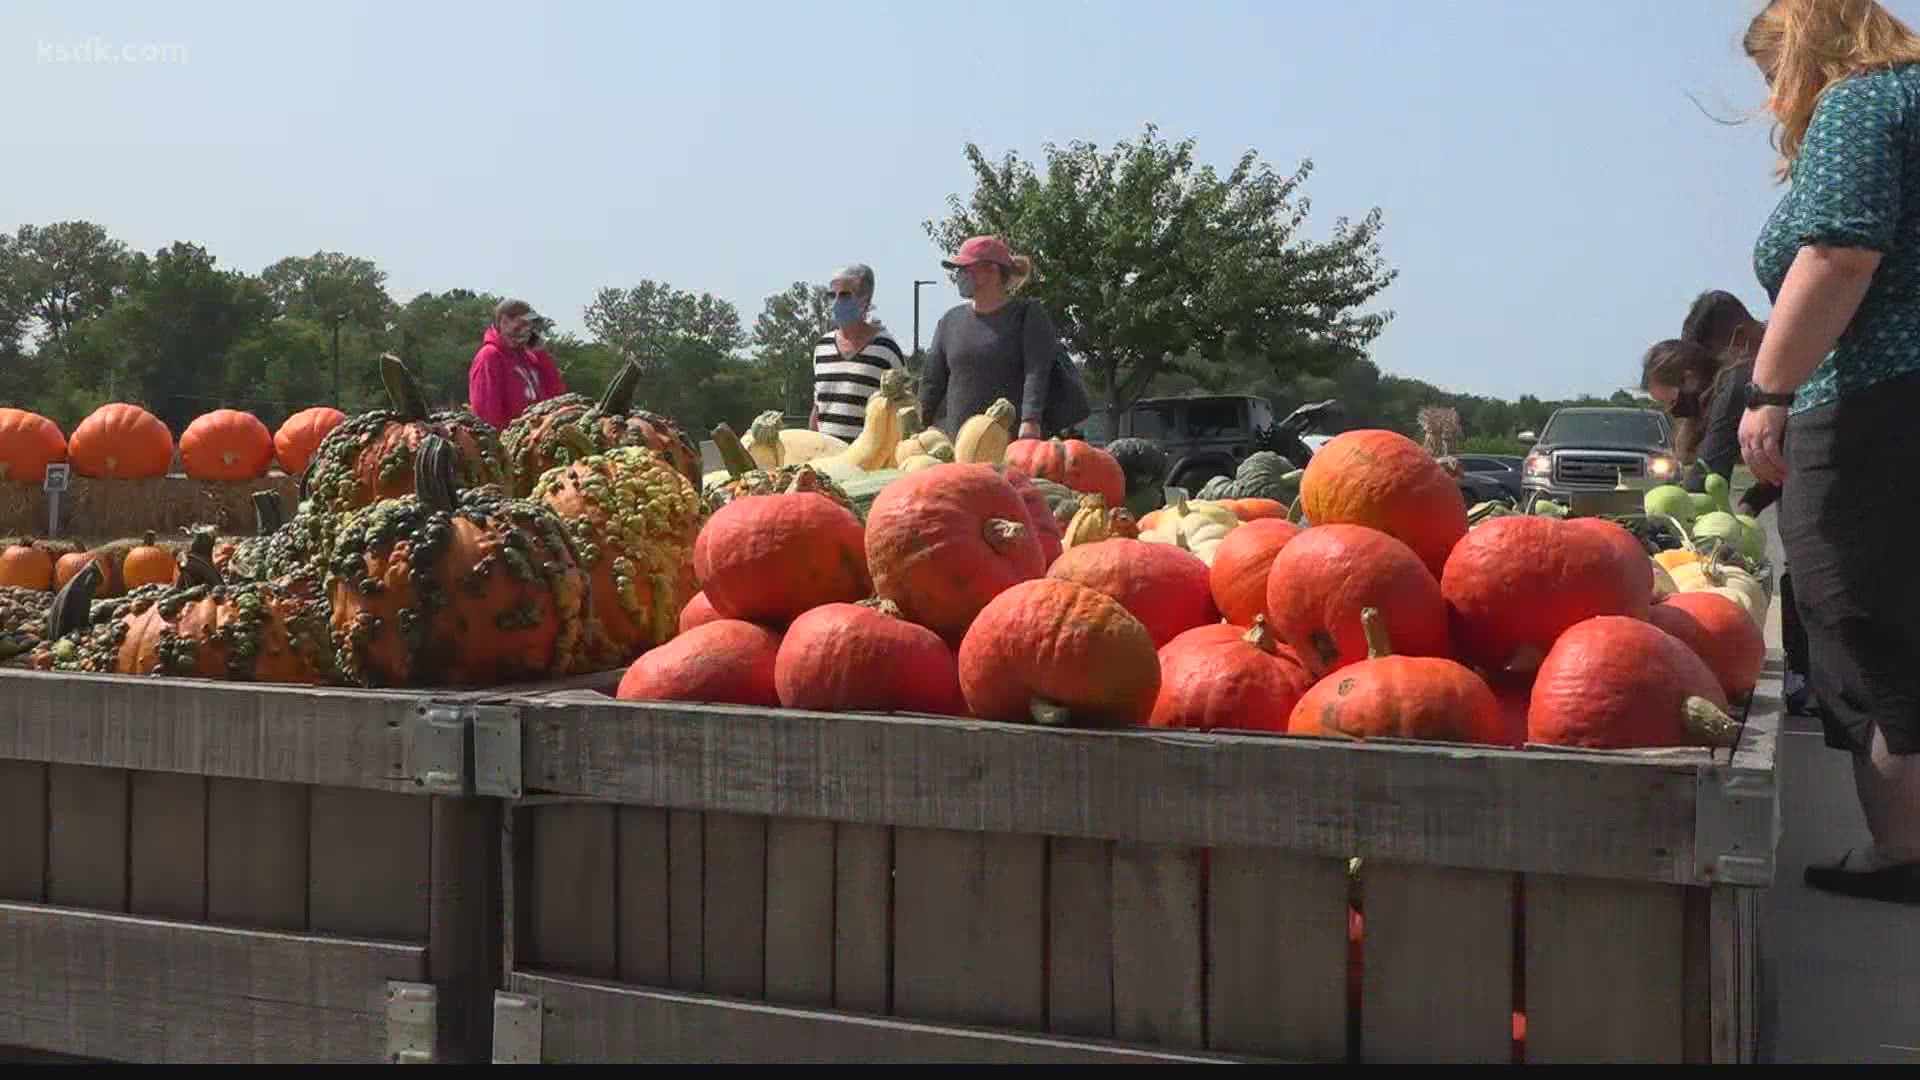 From pumpkin-picking to beer-tasting, there is no shortage of outdoor, socially-distanced activities and events